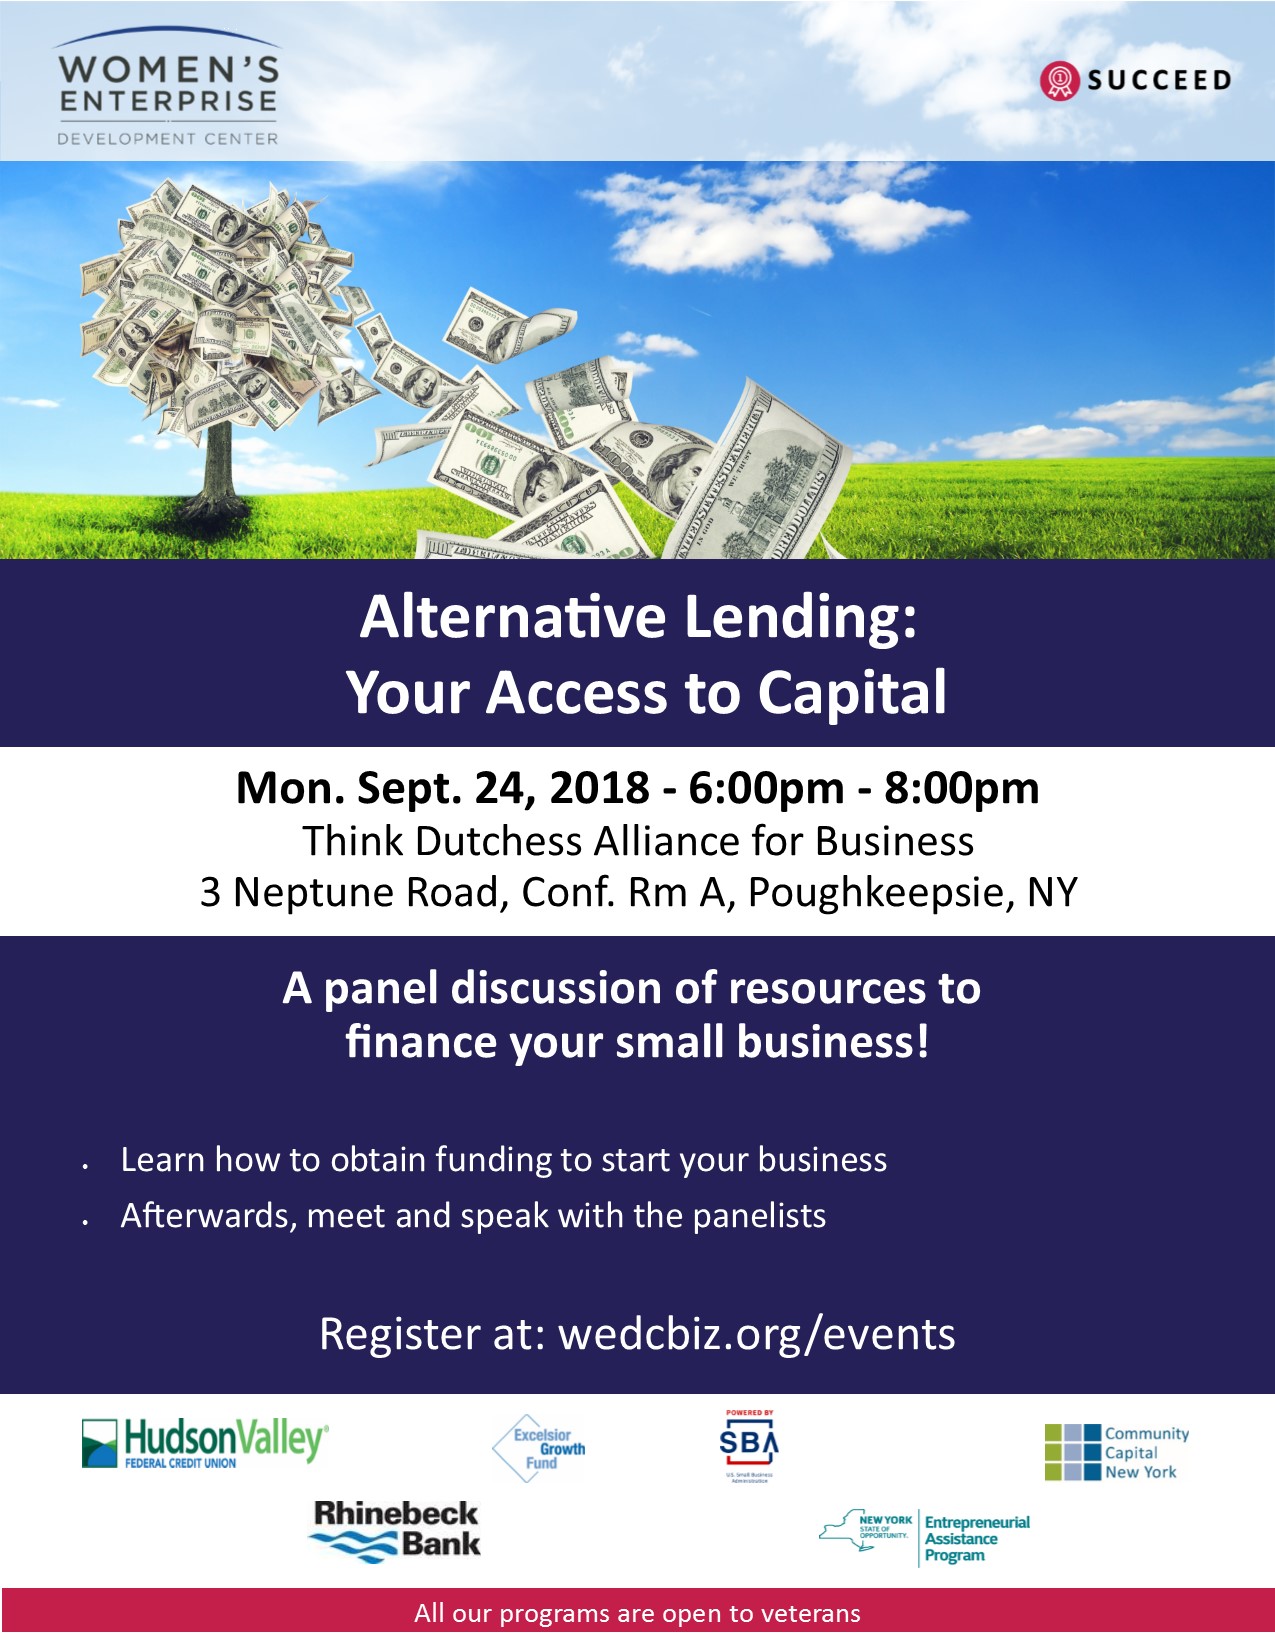 WEDC Alternative Lending Your Access to Capital 9-24-18